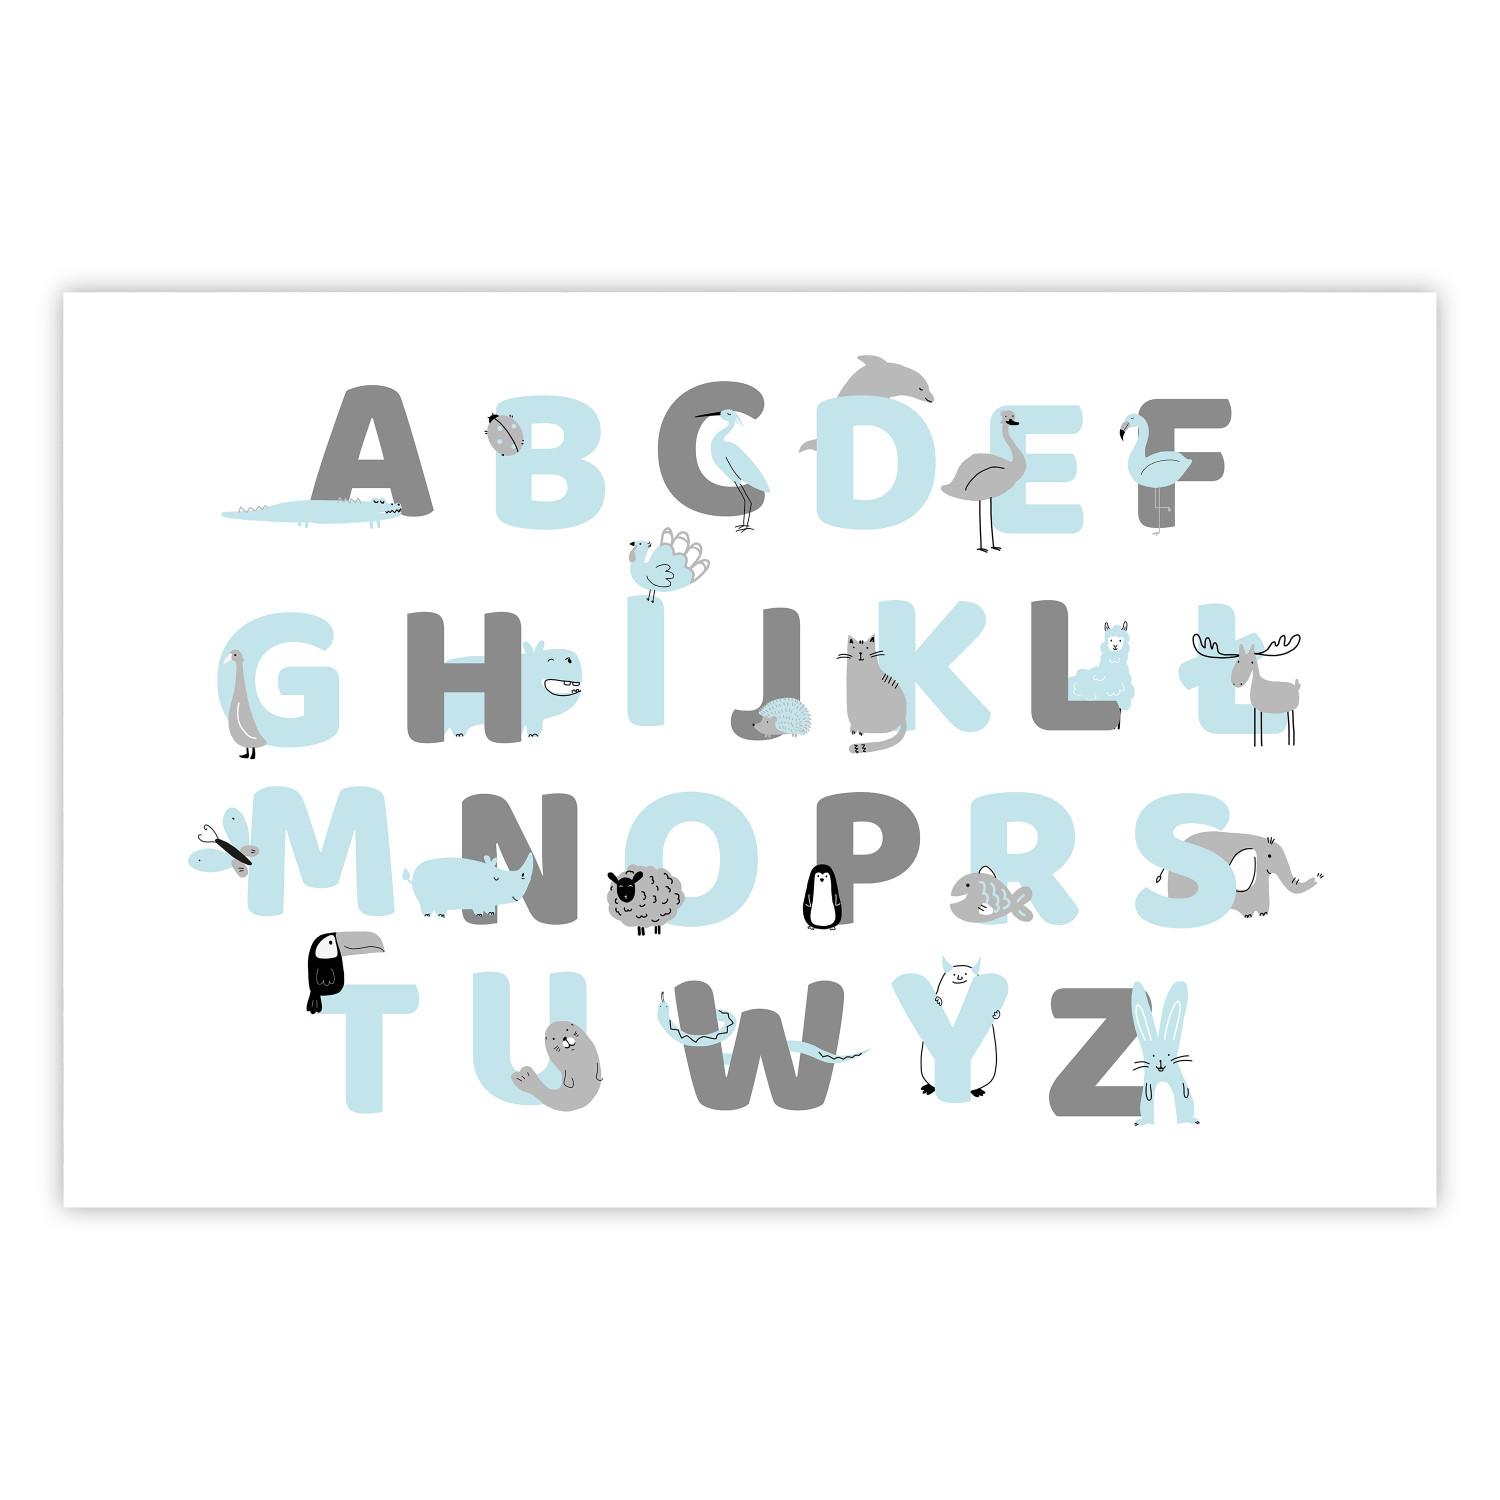 Cartel Polish Alphabet for Children - Gray and Blue Letters with Animals